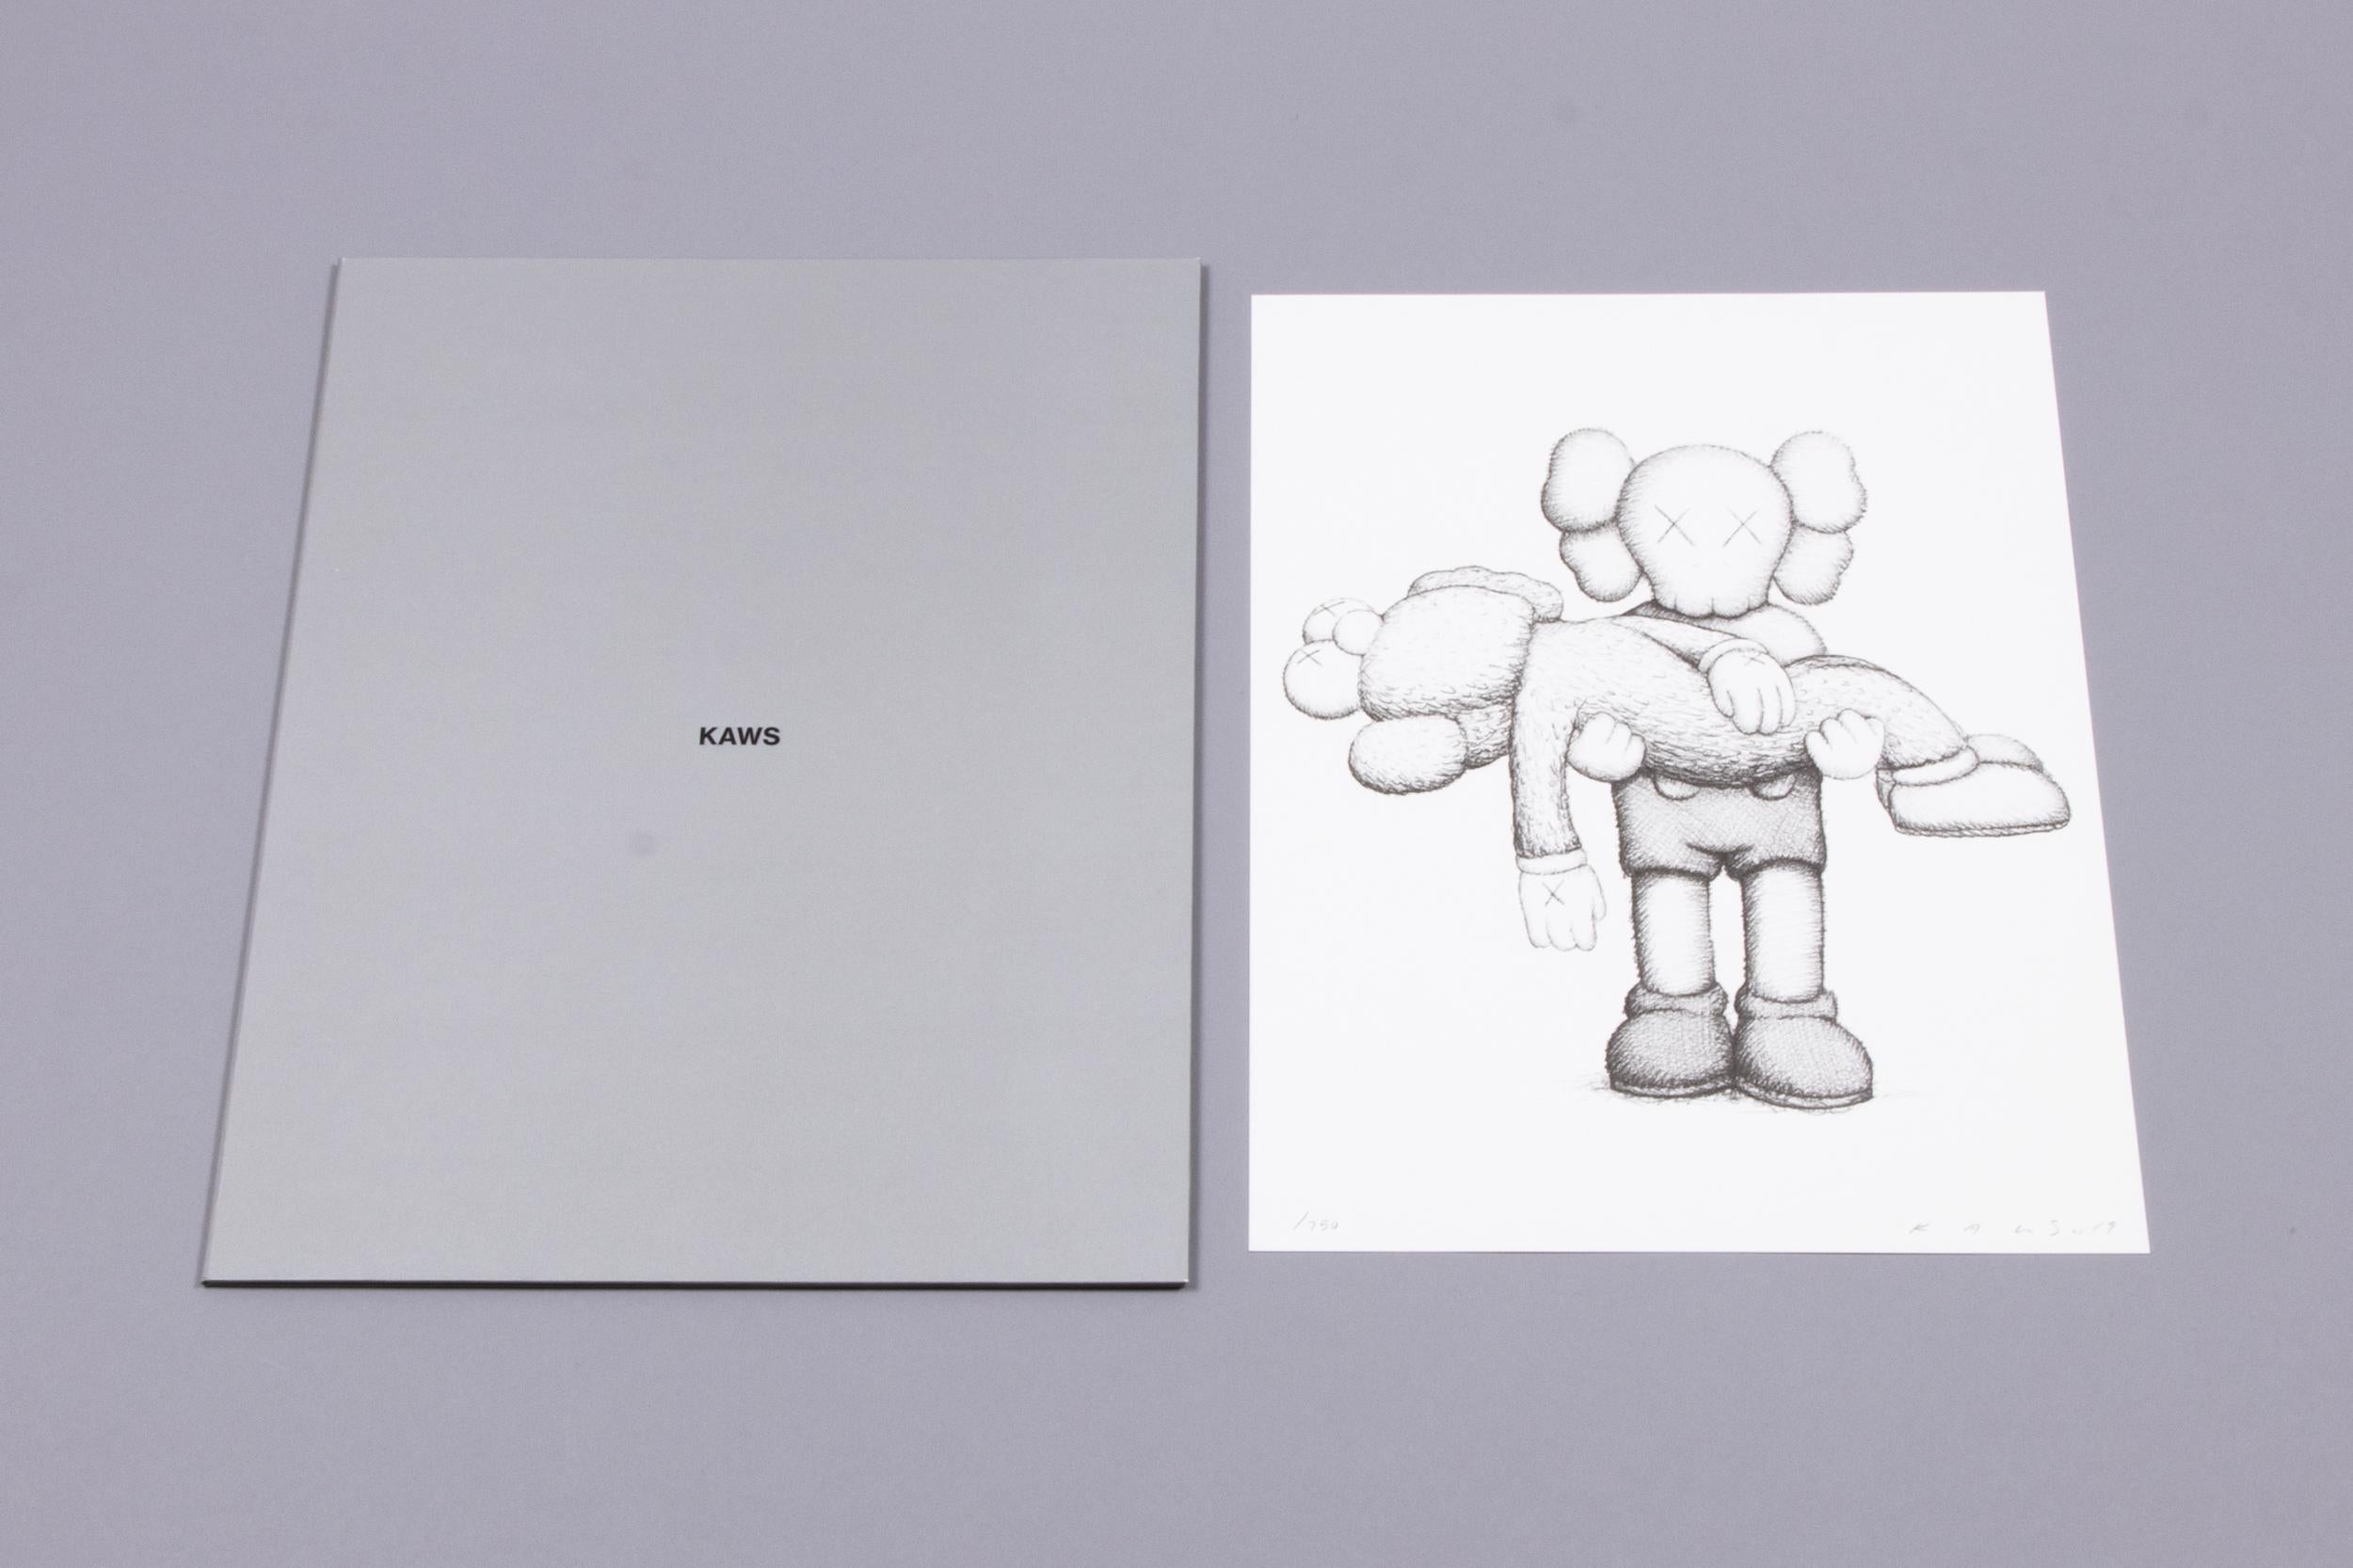 KAWS, Gone - Screenprint incl. Limited Edition Catalogue, Signed Print For Sale 3